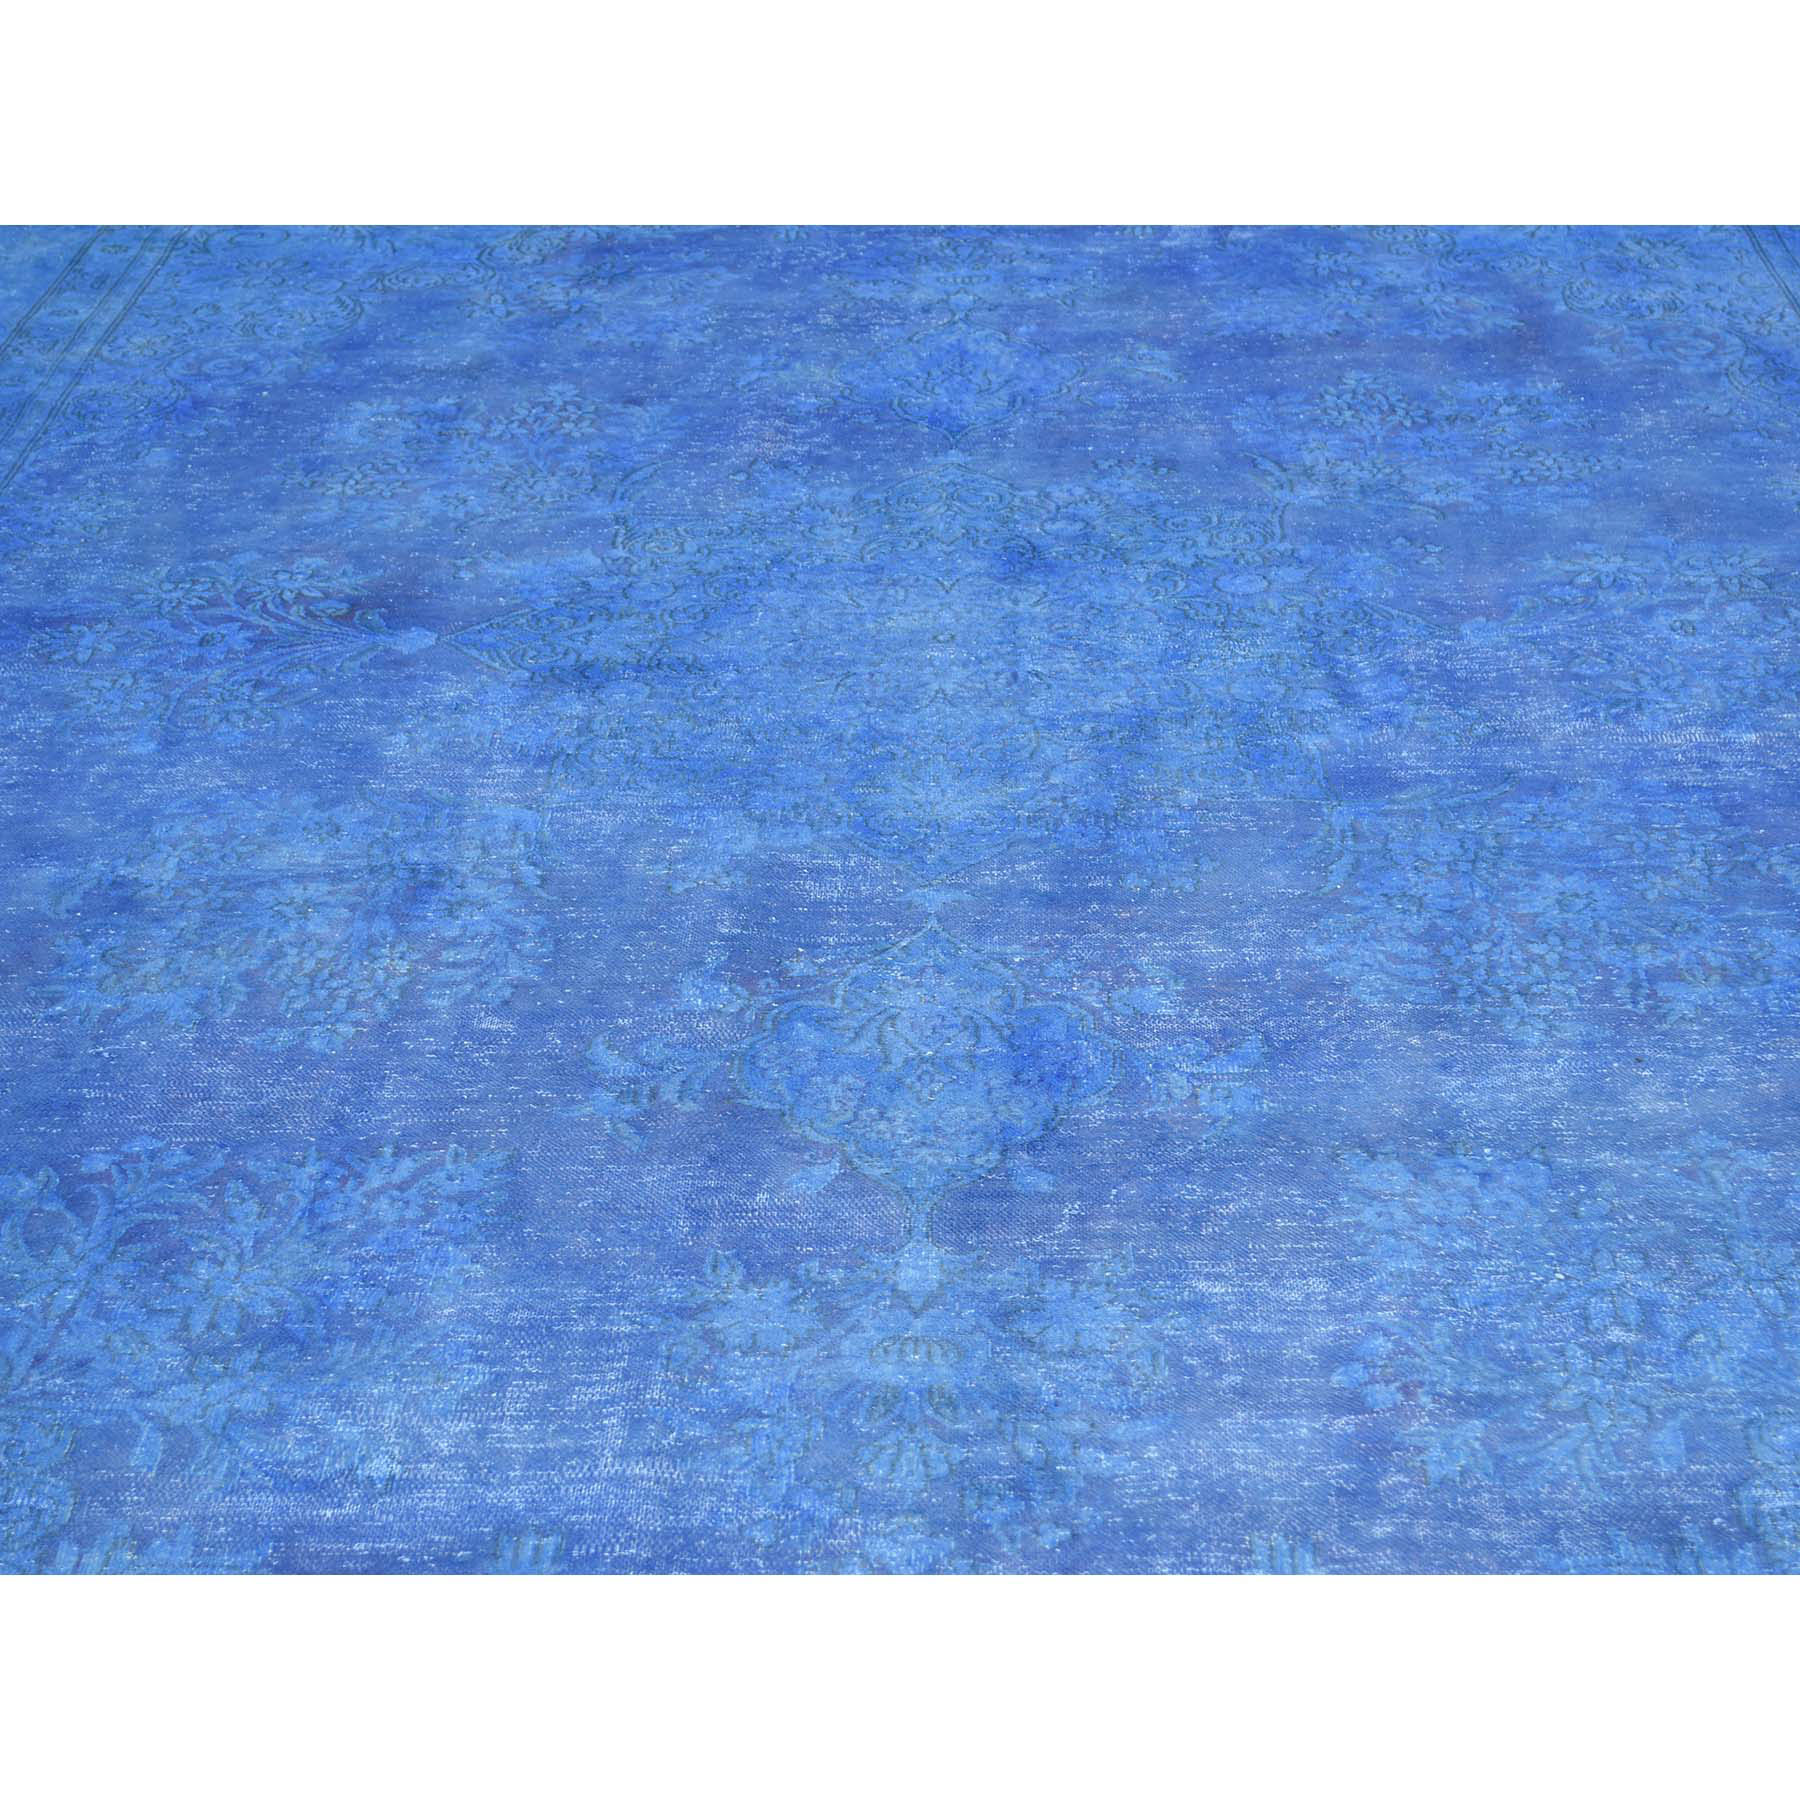 8-2 x12- Hand-Knotted Blue Overdyed Kerman 100 Percent Wool Oriental Rug 